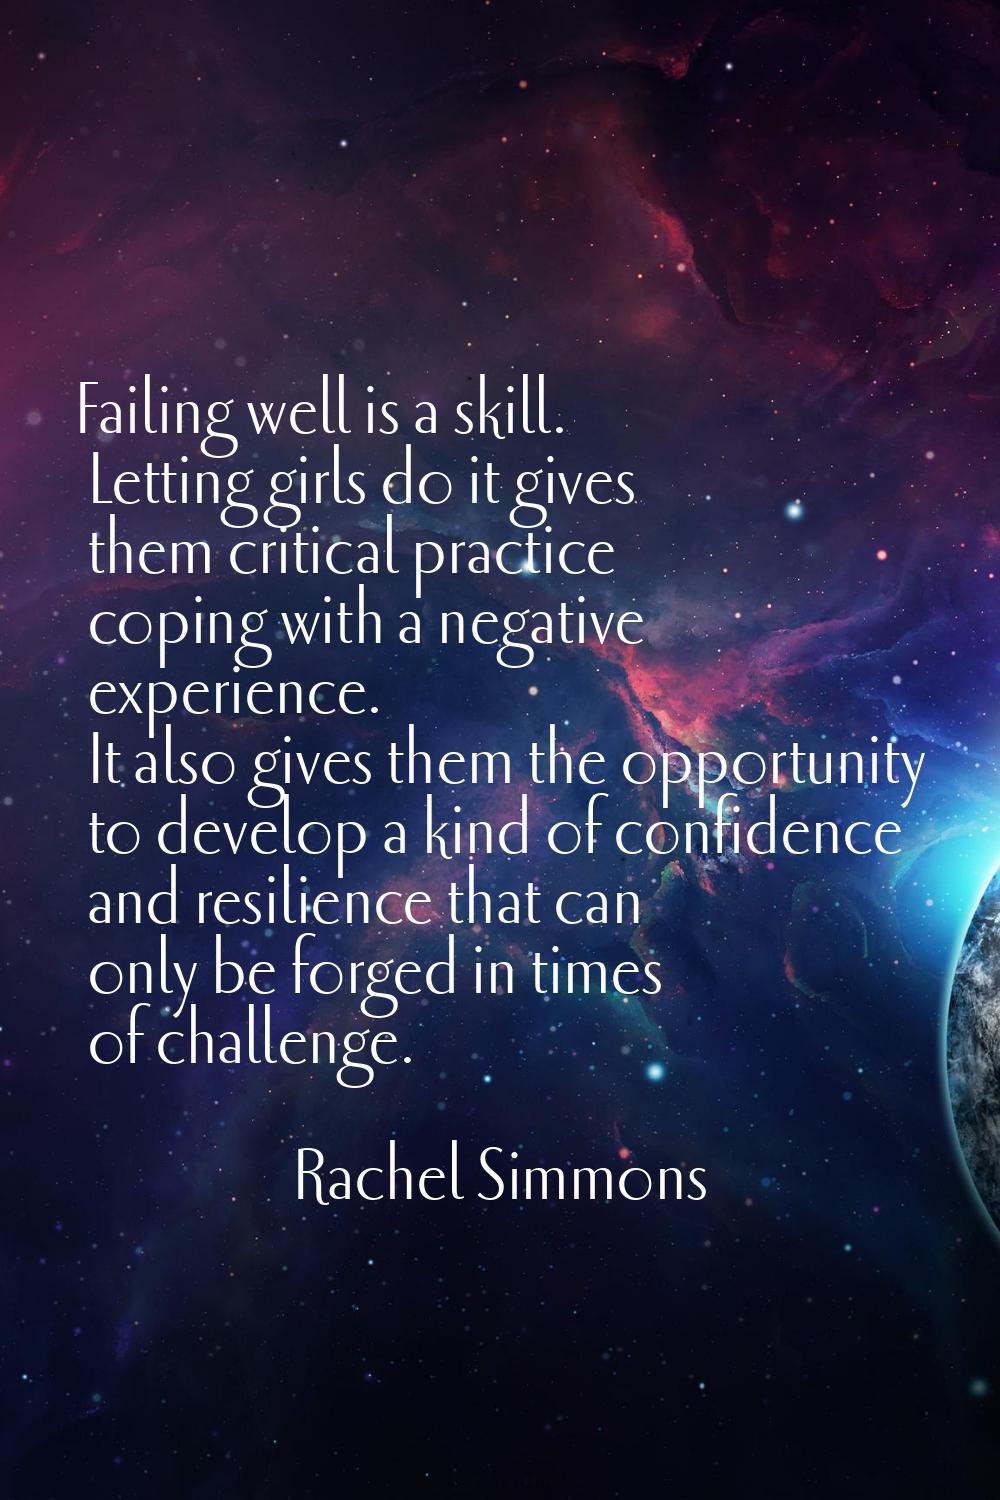 Failing well is a skill. Letting girls do it gives them critical practice coping with a negative ex